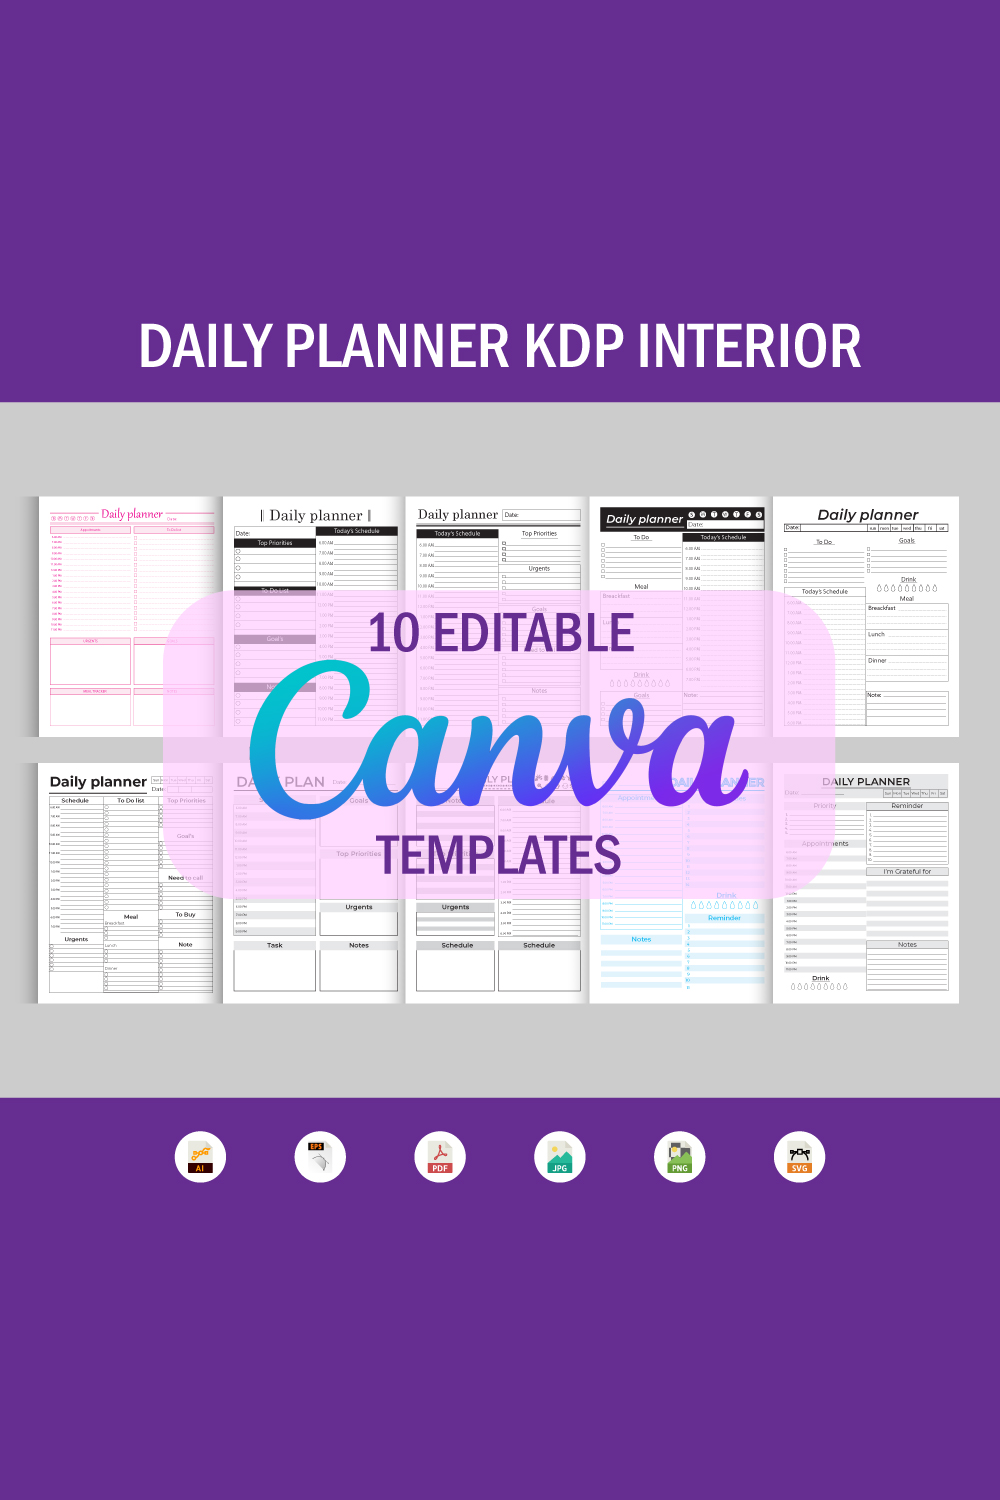 Daily Planner for KDP Editable Canva Templates pinterest image.